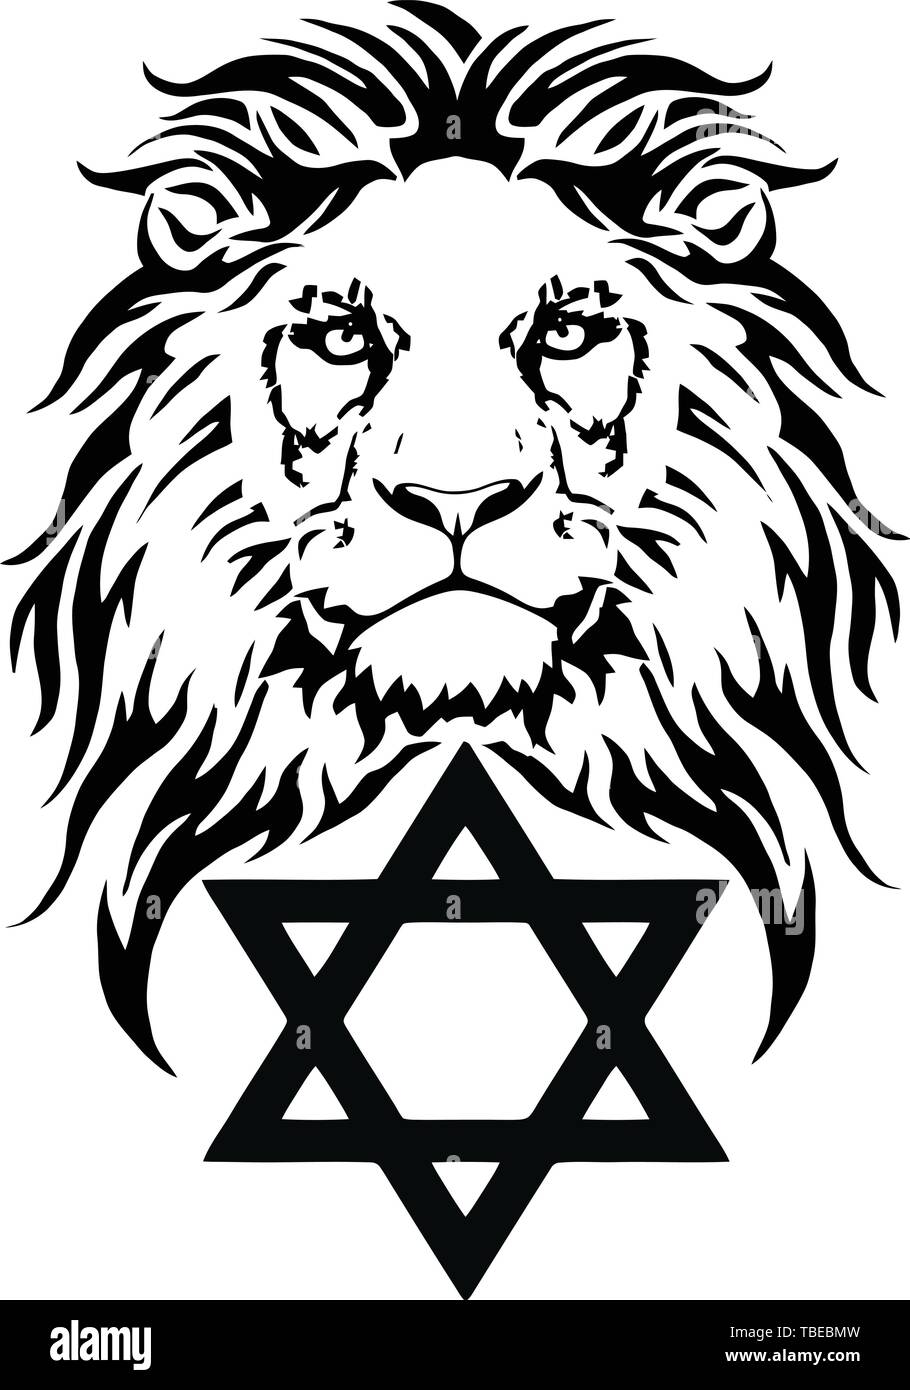 The Lion and the symbol of Judaism - star of David, Megan David, drawing for tattoo, on a white background, vector Stock Vector